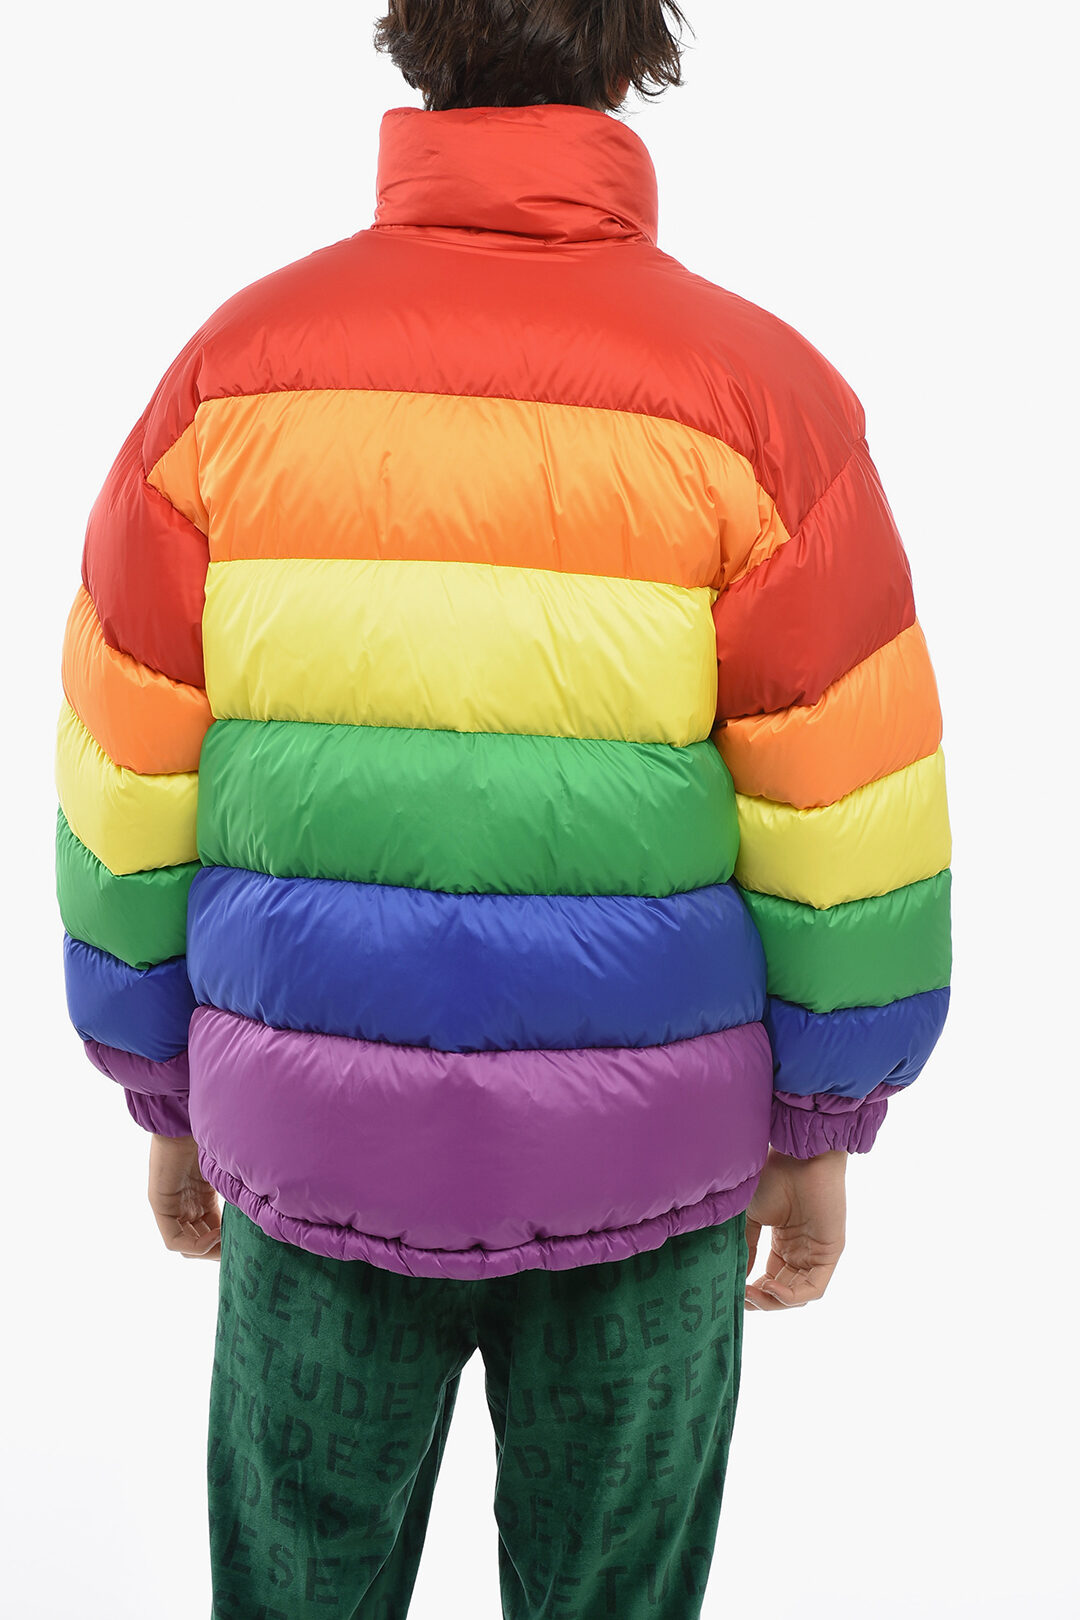 Burberry RAINBOW Oversized Down Jacket with Striped Pattern men ...